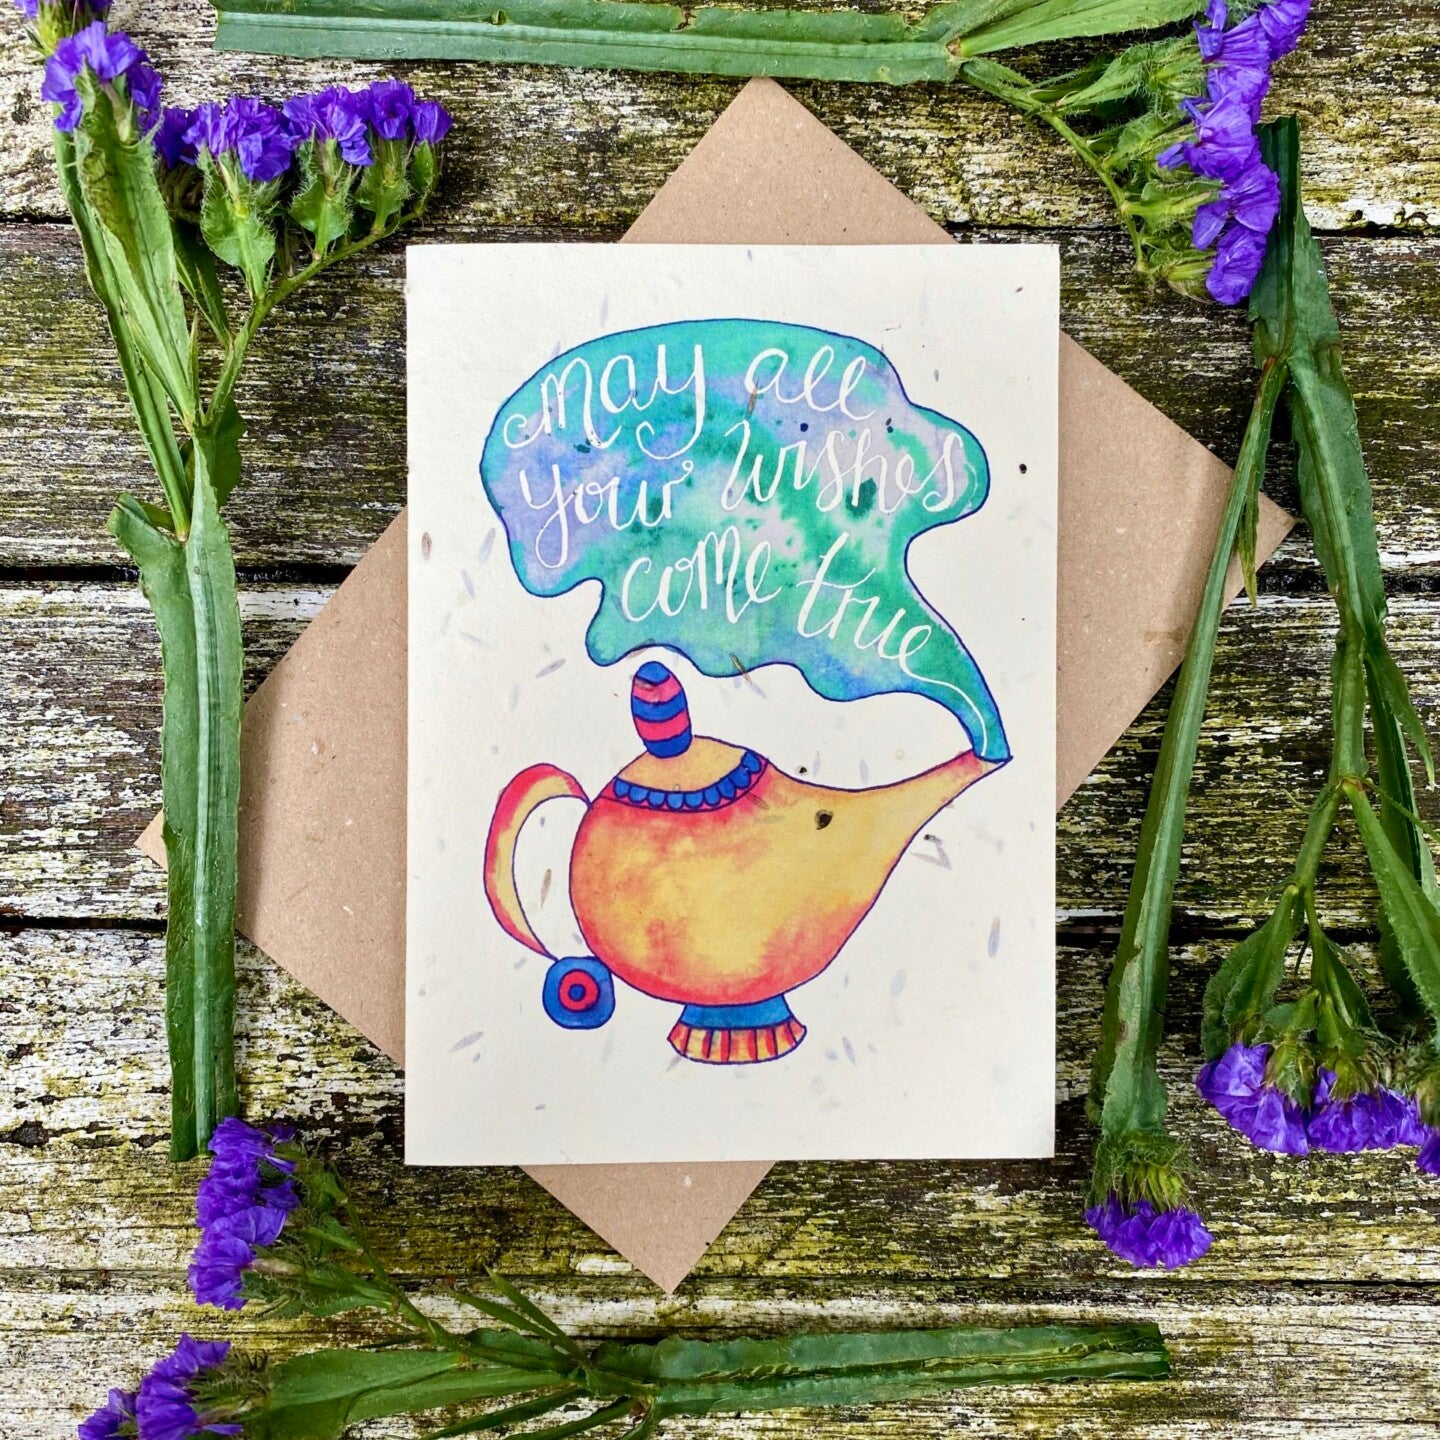 May All Your Wishes Come True - Plantable Wildflower Card | Greetings Card - The Naughty Shrew